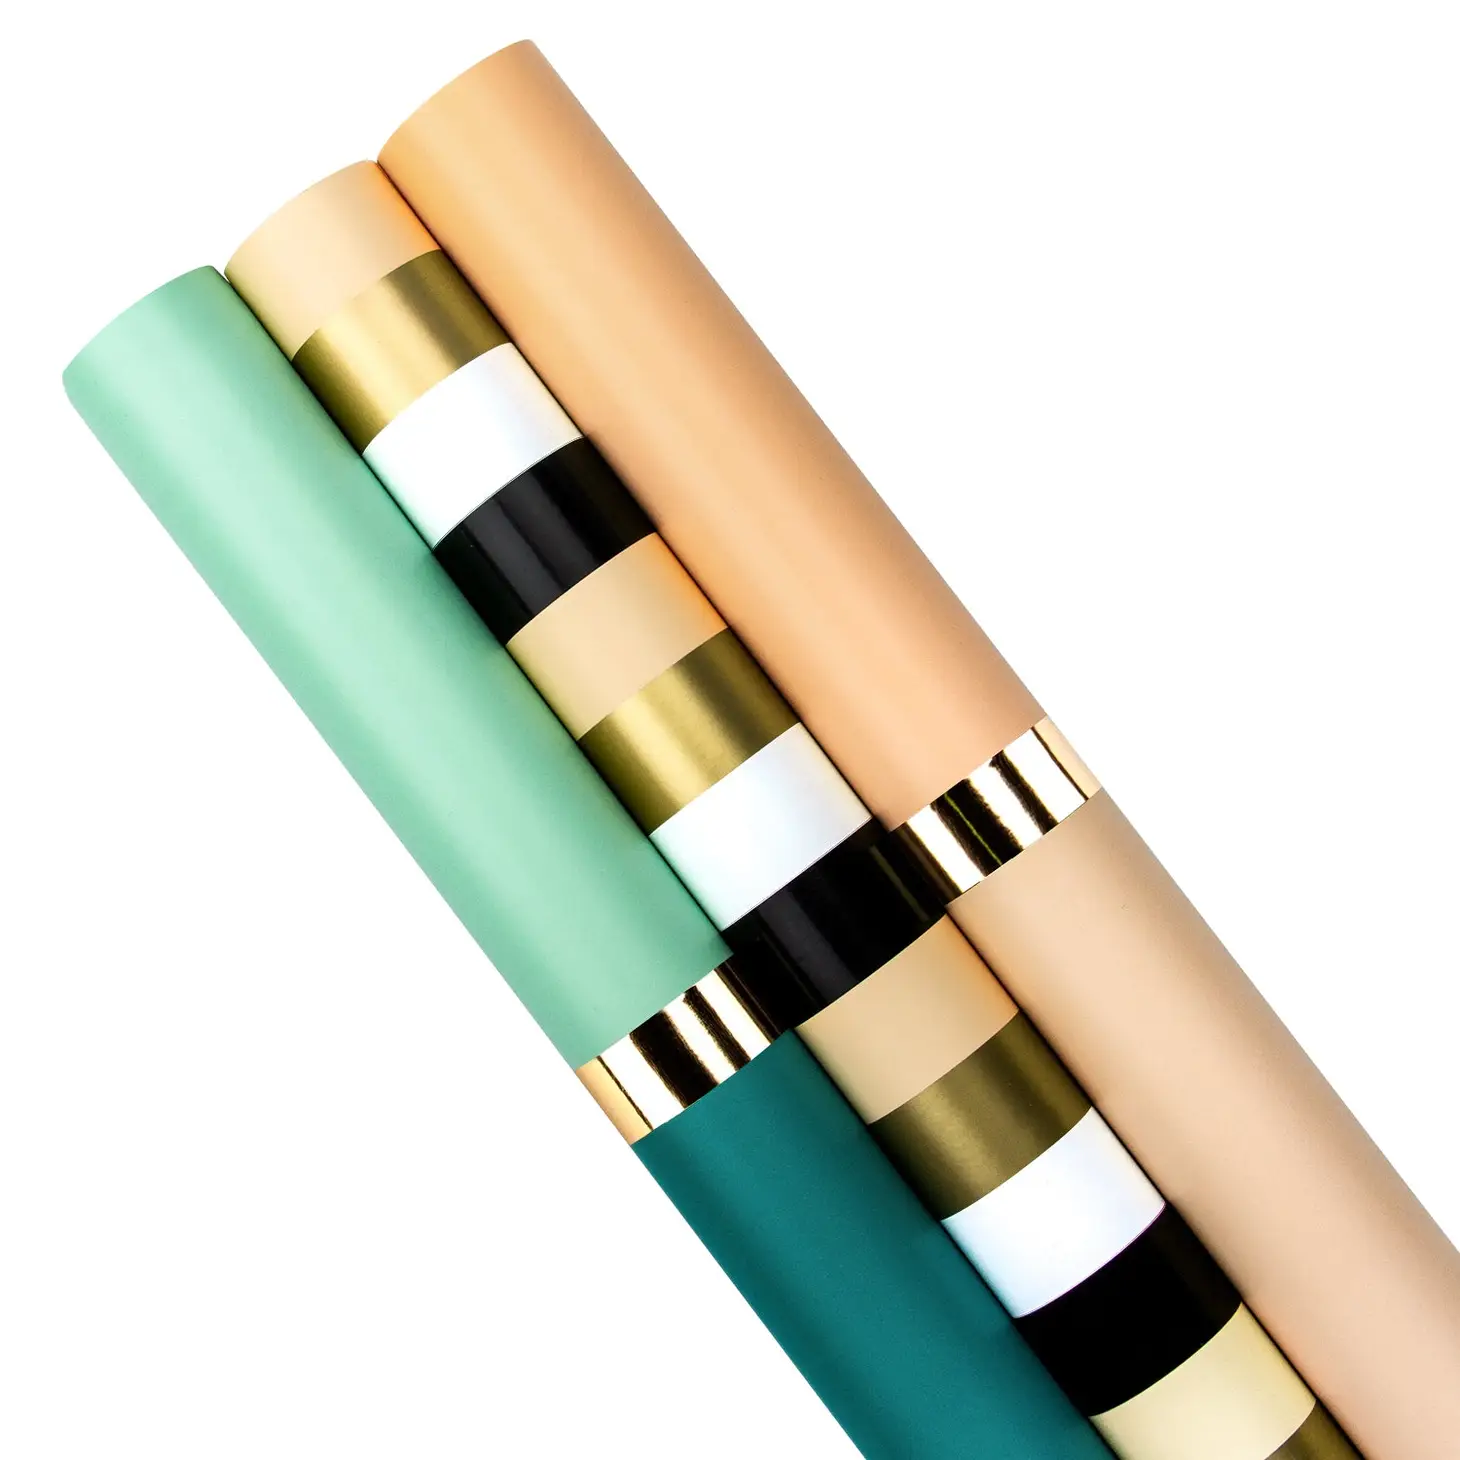 Birthday Wrapping Paper 3 Roll Bundle - Gold Foil Stripes -